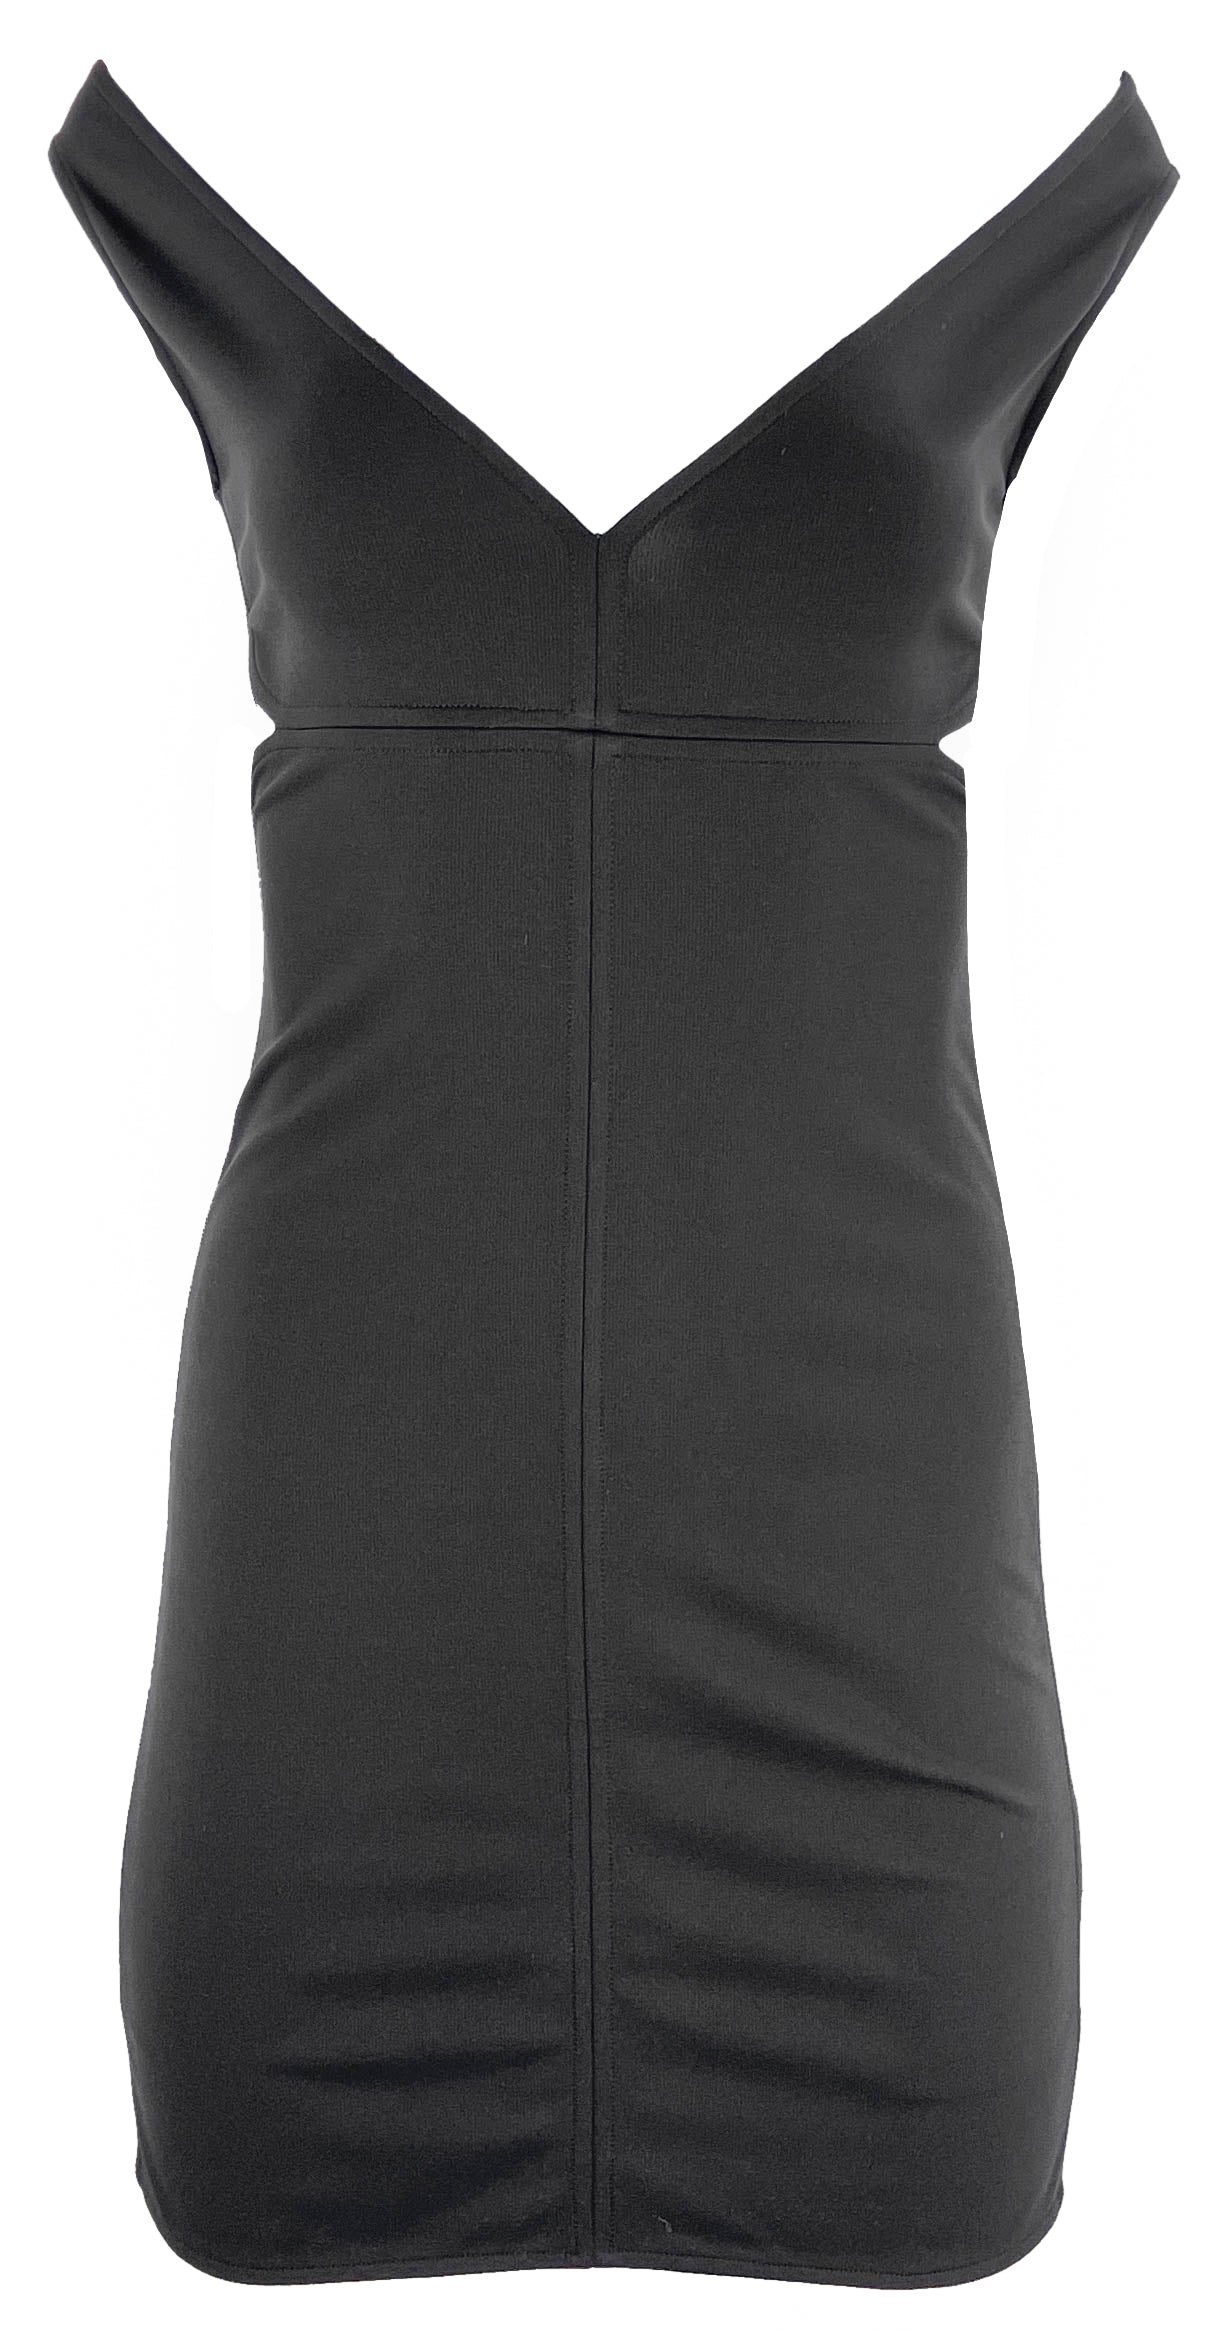 Courrēges Cut-Out Mini Dress in Black - Discounts on Courrēges at UAL